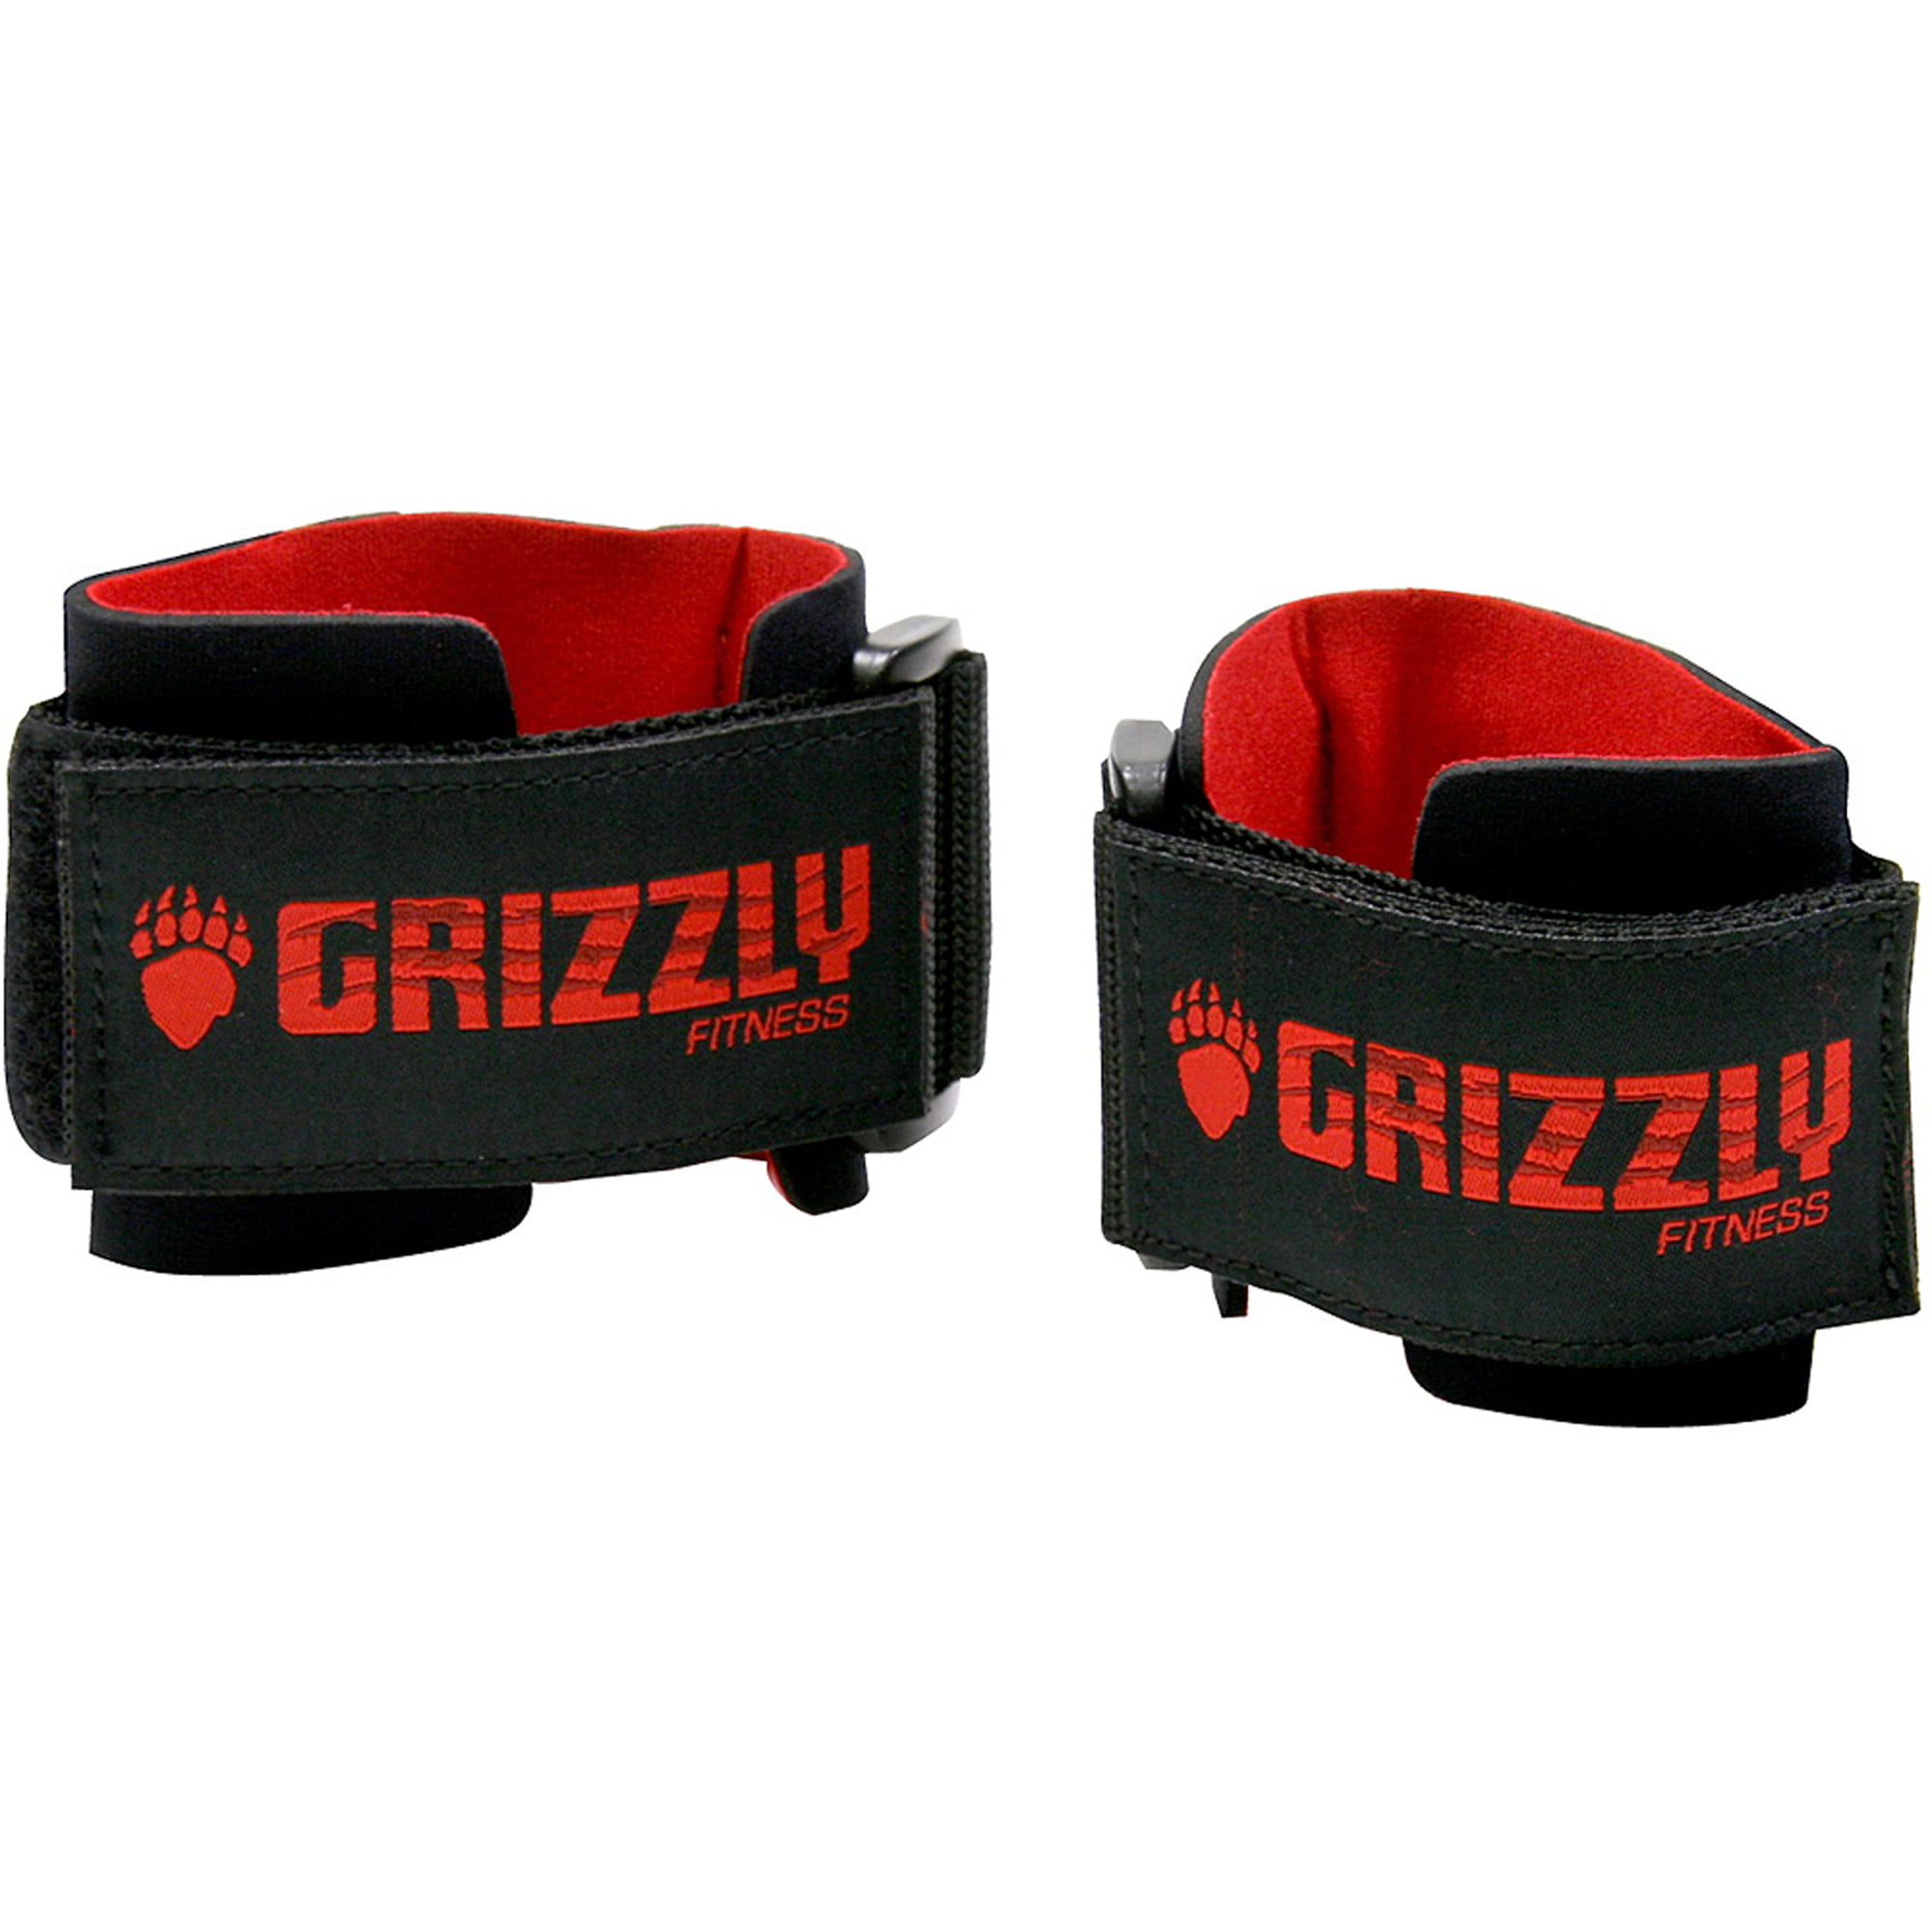 Grizzly Fitness Men's Washable Sport & Fitness Nylon Gloves Gym Weight Lifting 